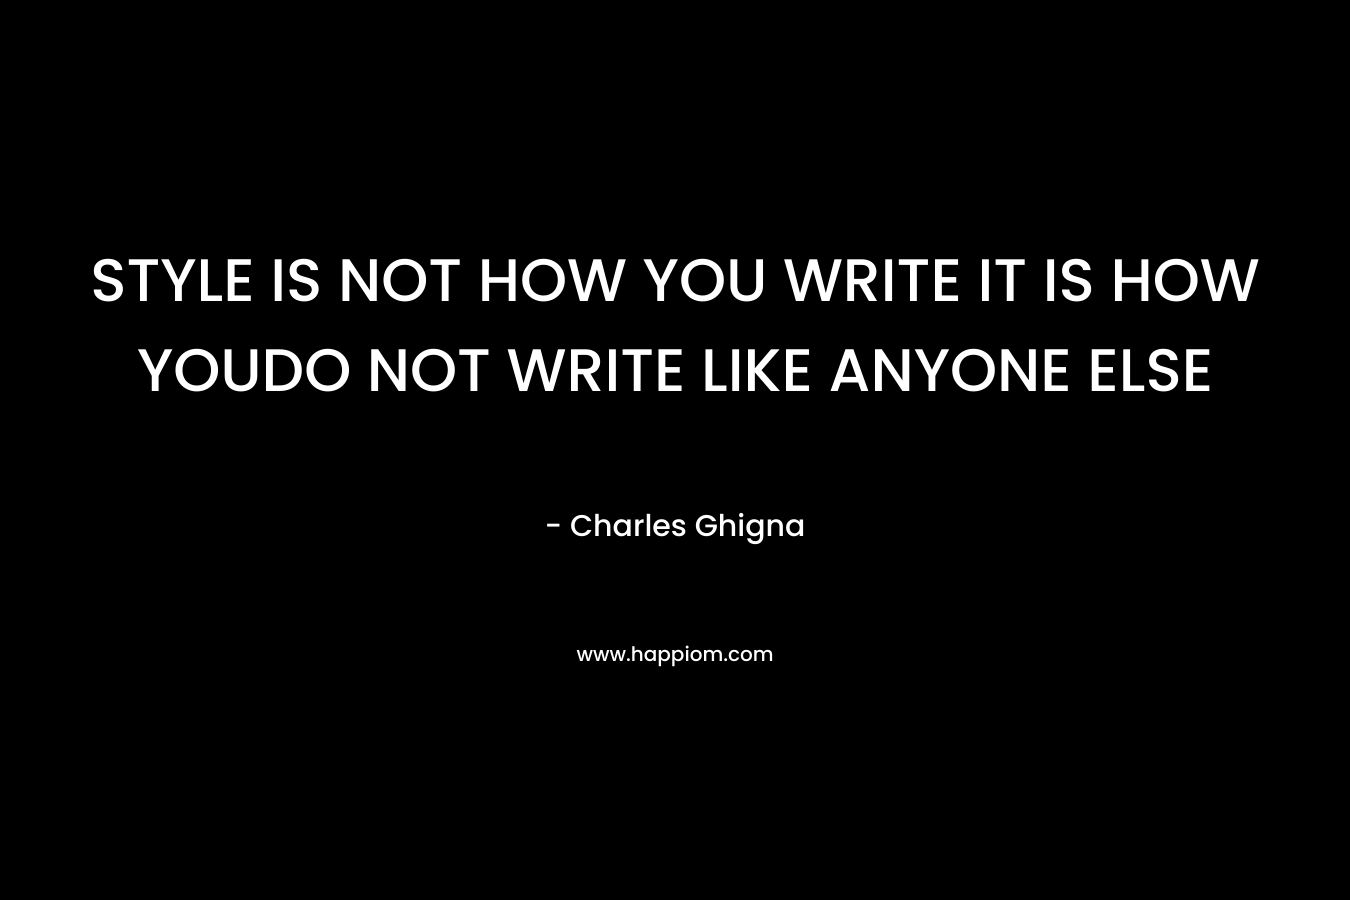 STYLE IS NOT HOW YOU WRITE IT IS HOW YOUDO NOT WRITE LIKE ANYONE ELSE